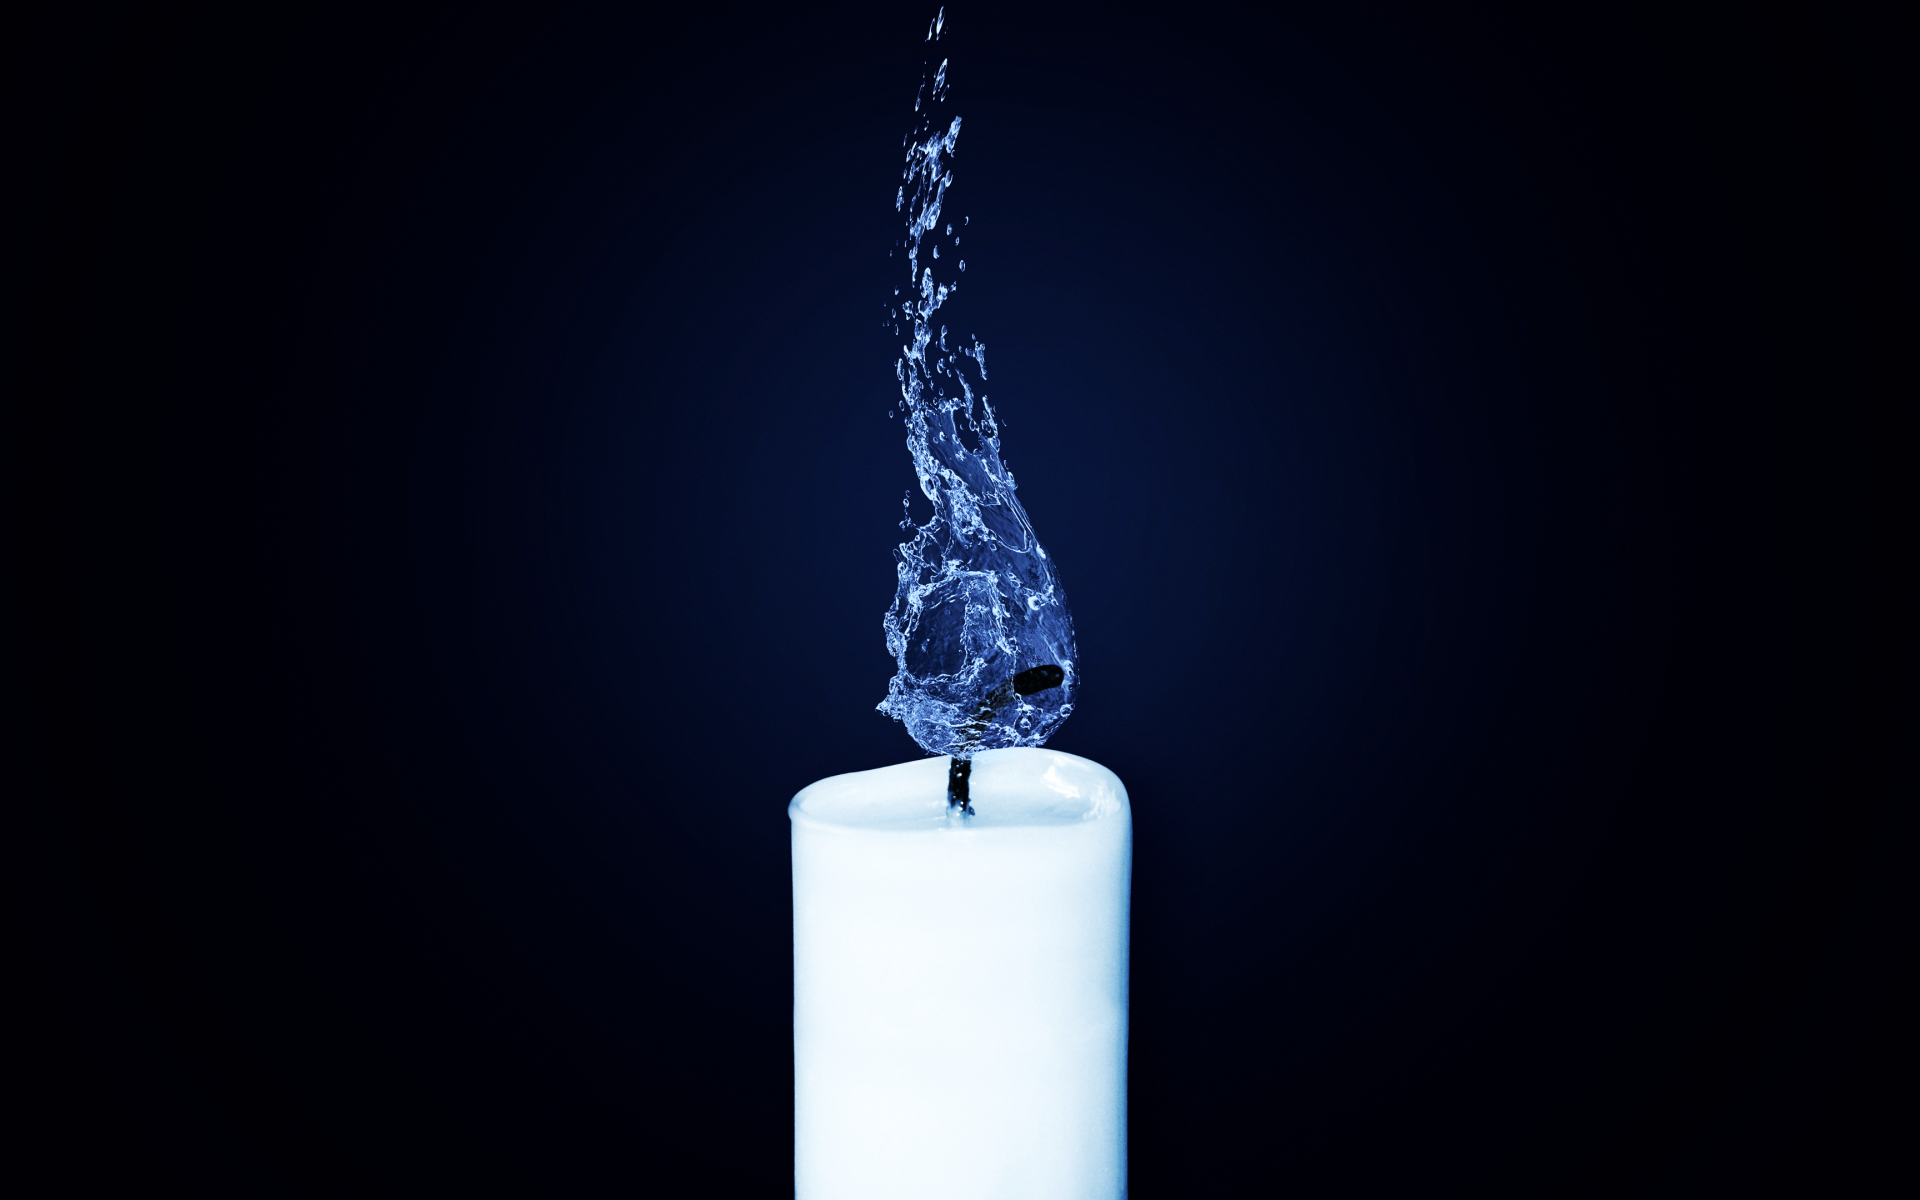 White candle burns with a flame of blue water